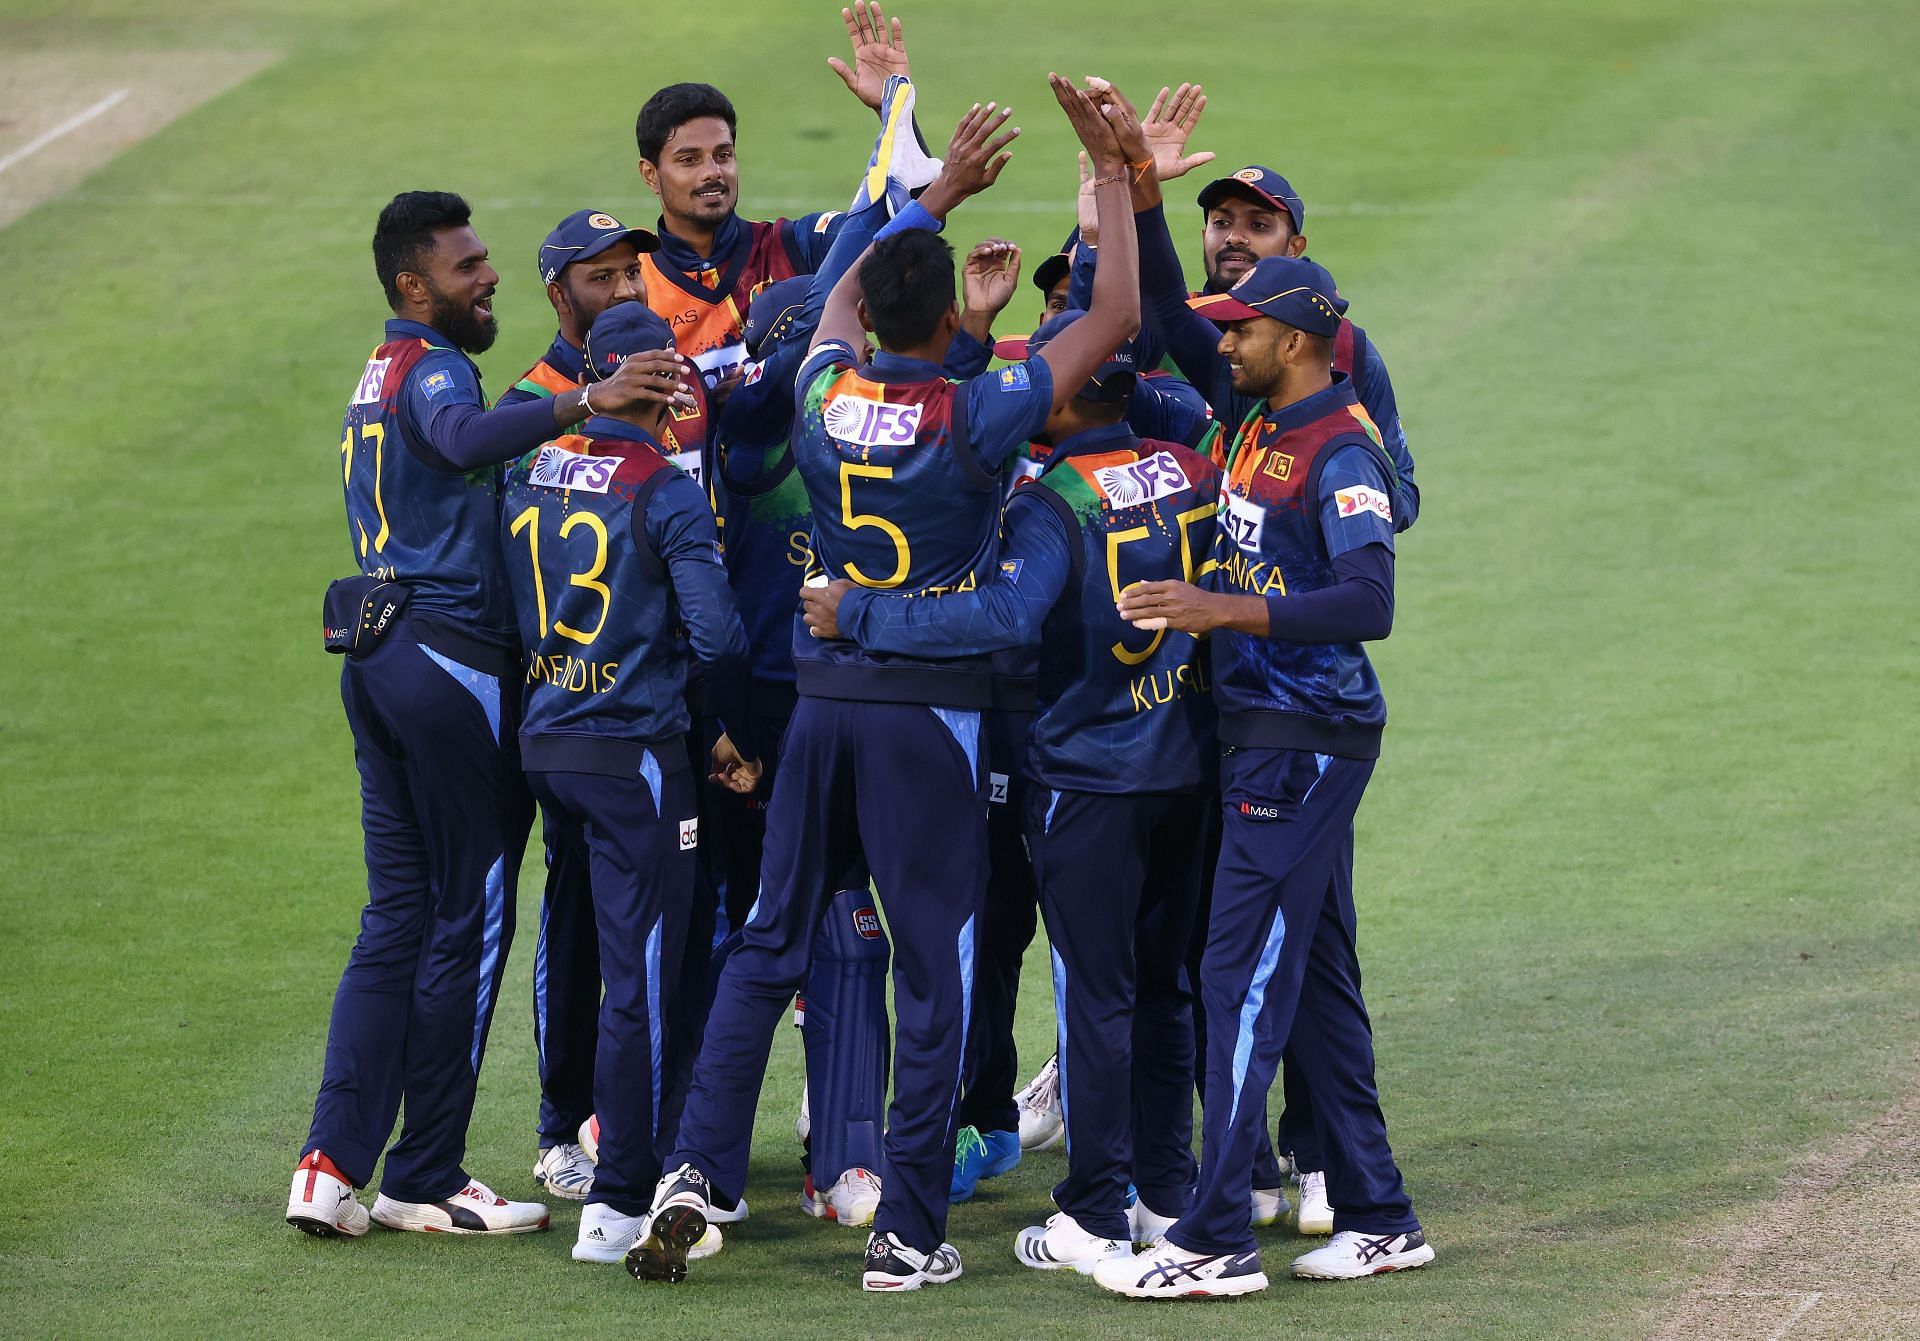 T20 World Cup 2021 Match 22, Australia vs Sri Lanka Probable XIs, match prediction, live streaming, weather forecast, and pitch report